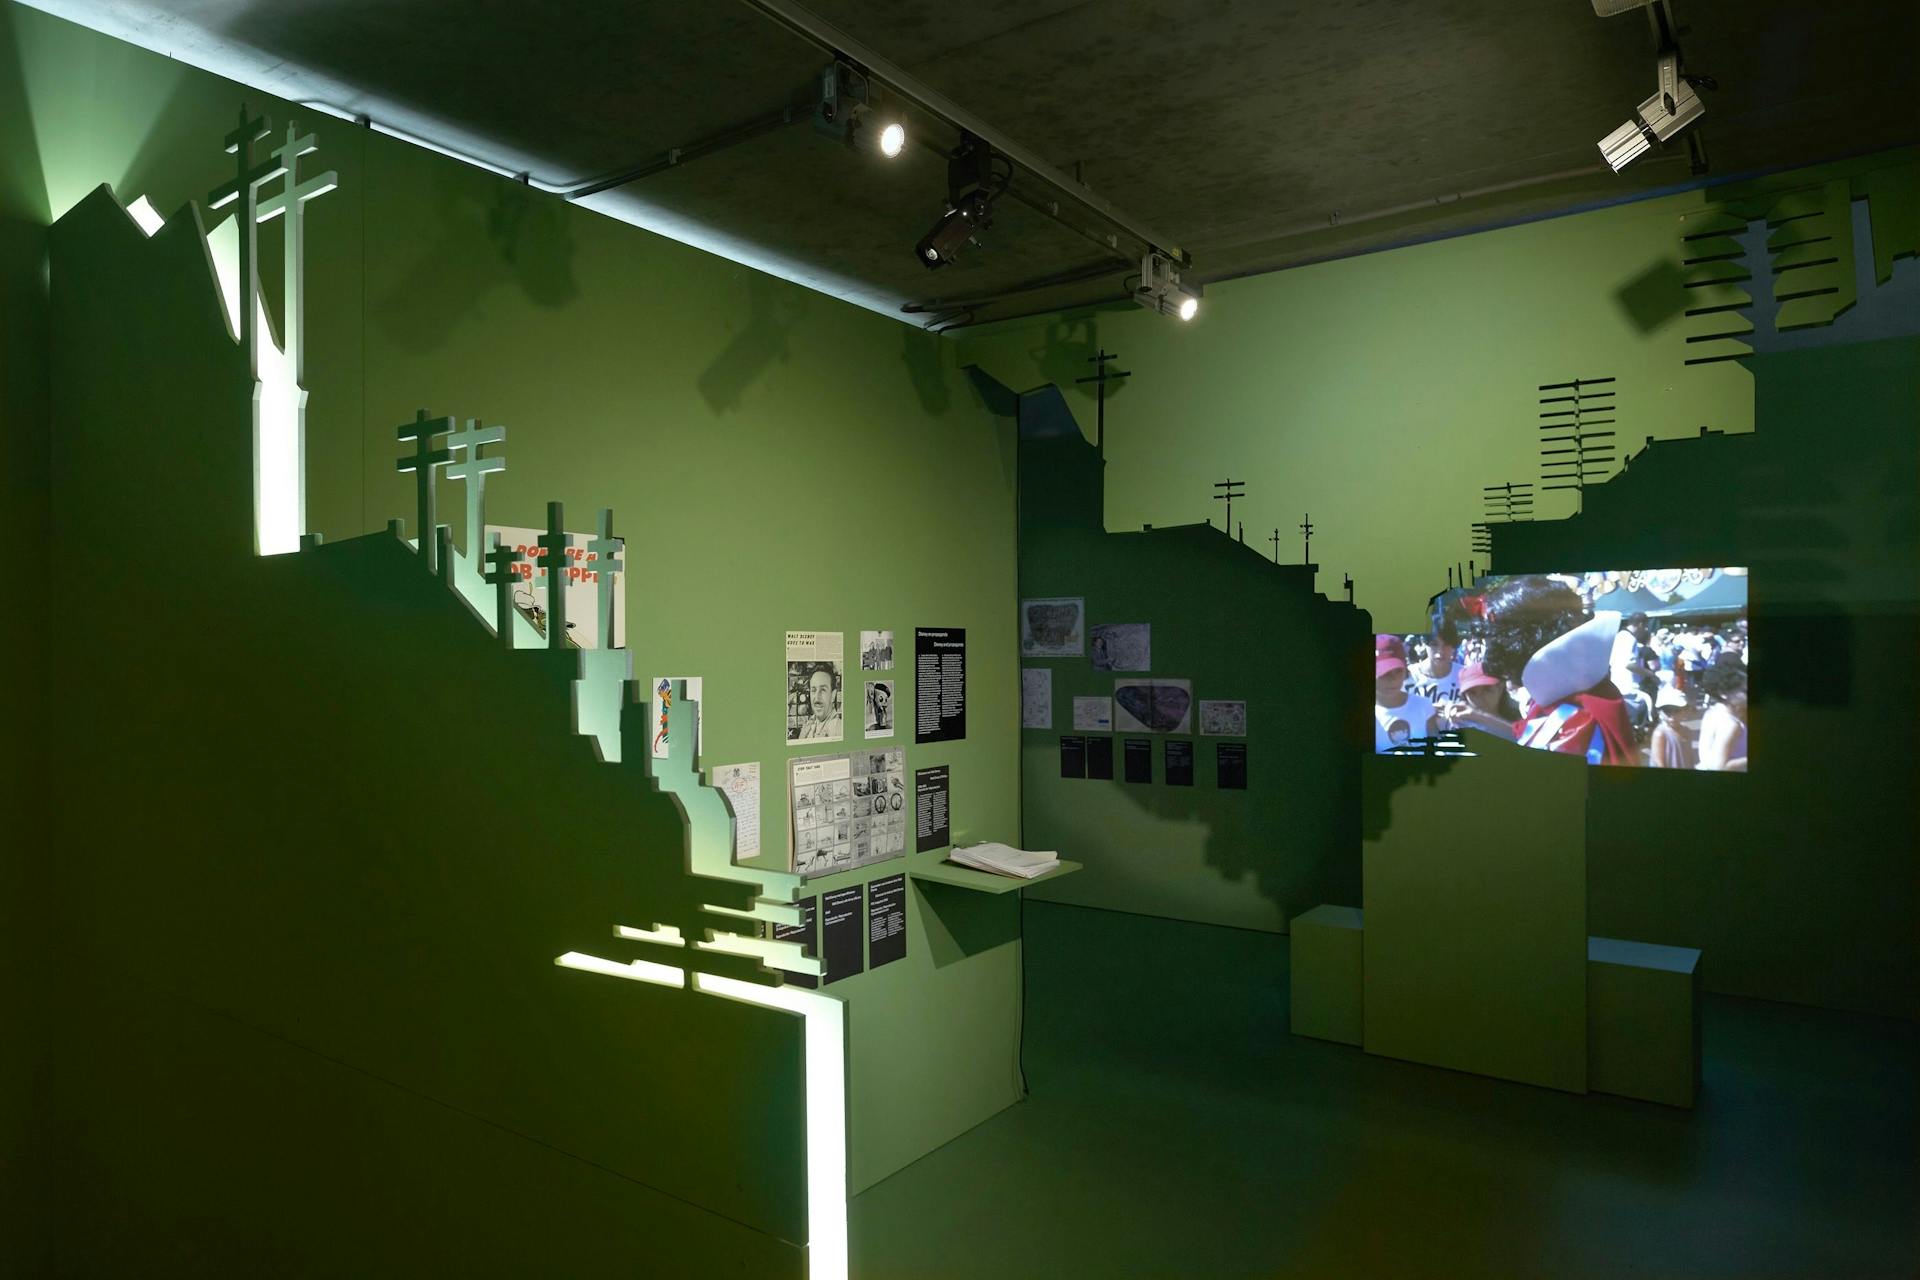 Exhibition view, "The Architecture of Staged Realities". Photo: Johannes Schwartz-1 